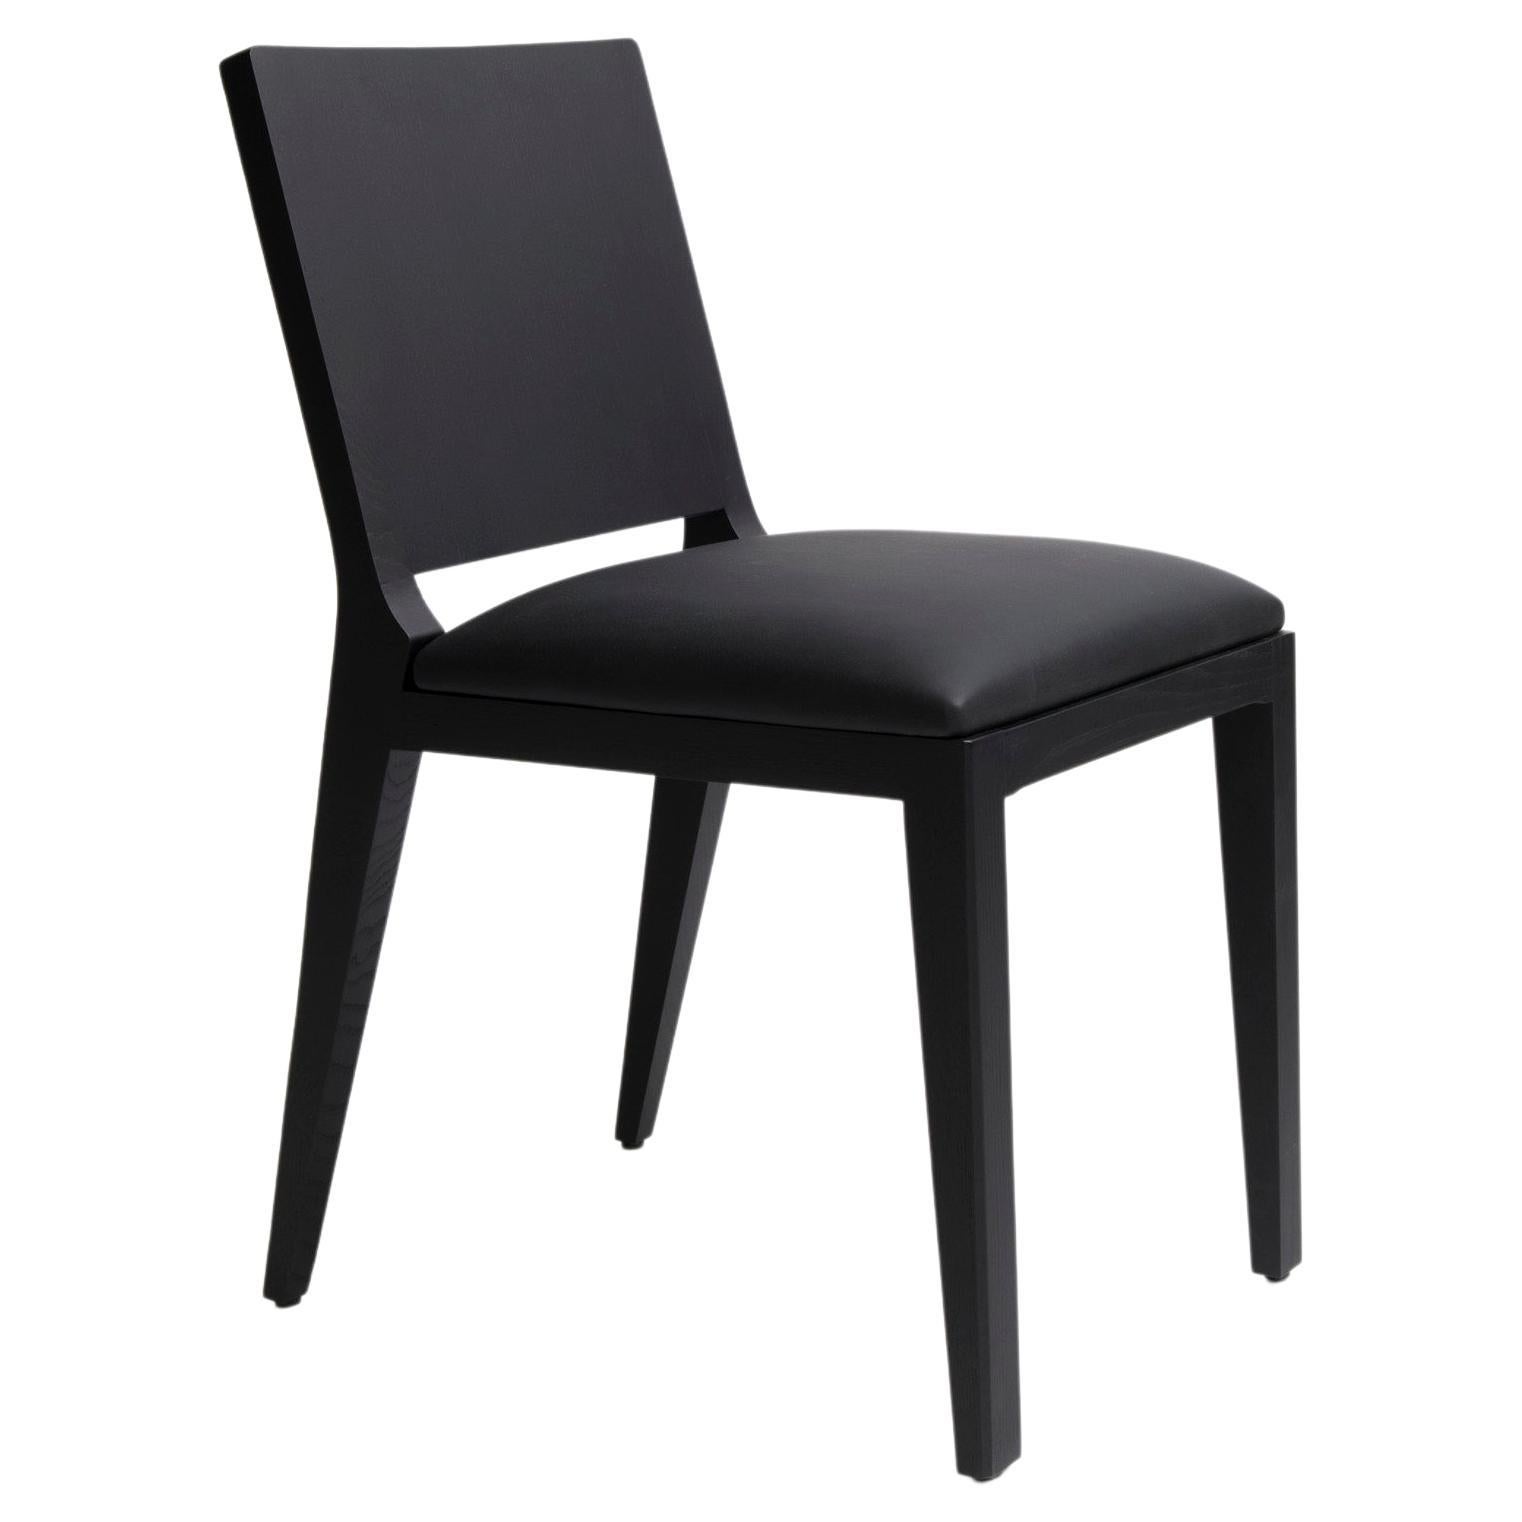 Black Upholstered Ash Chair - om5.1  by mjiila For Sale